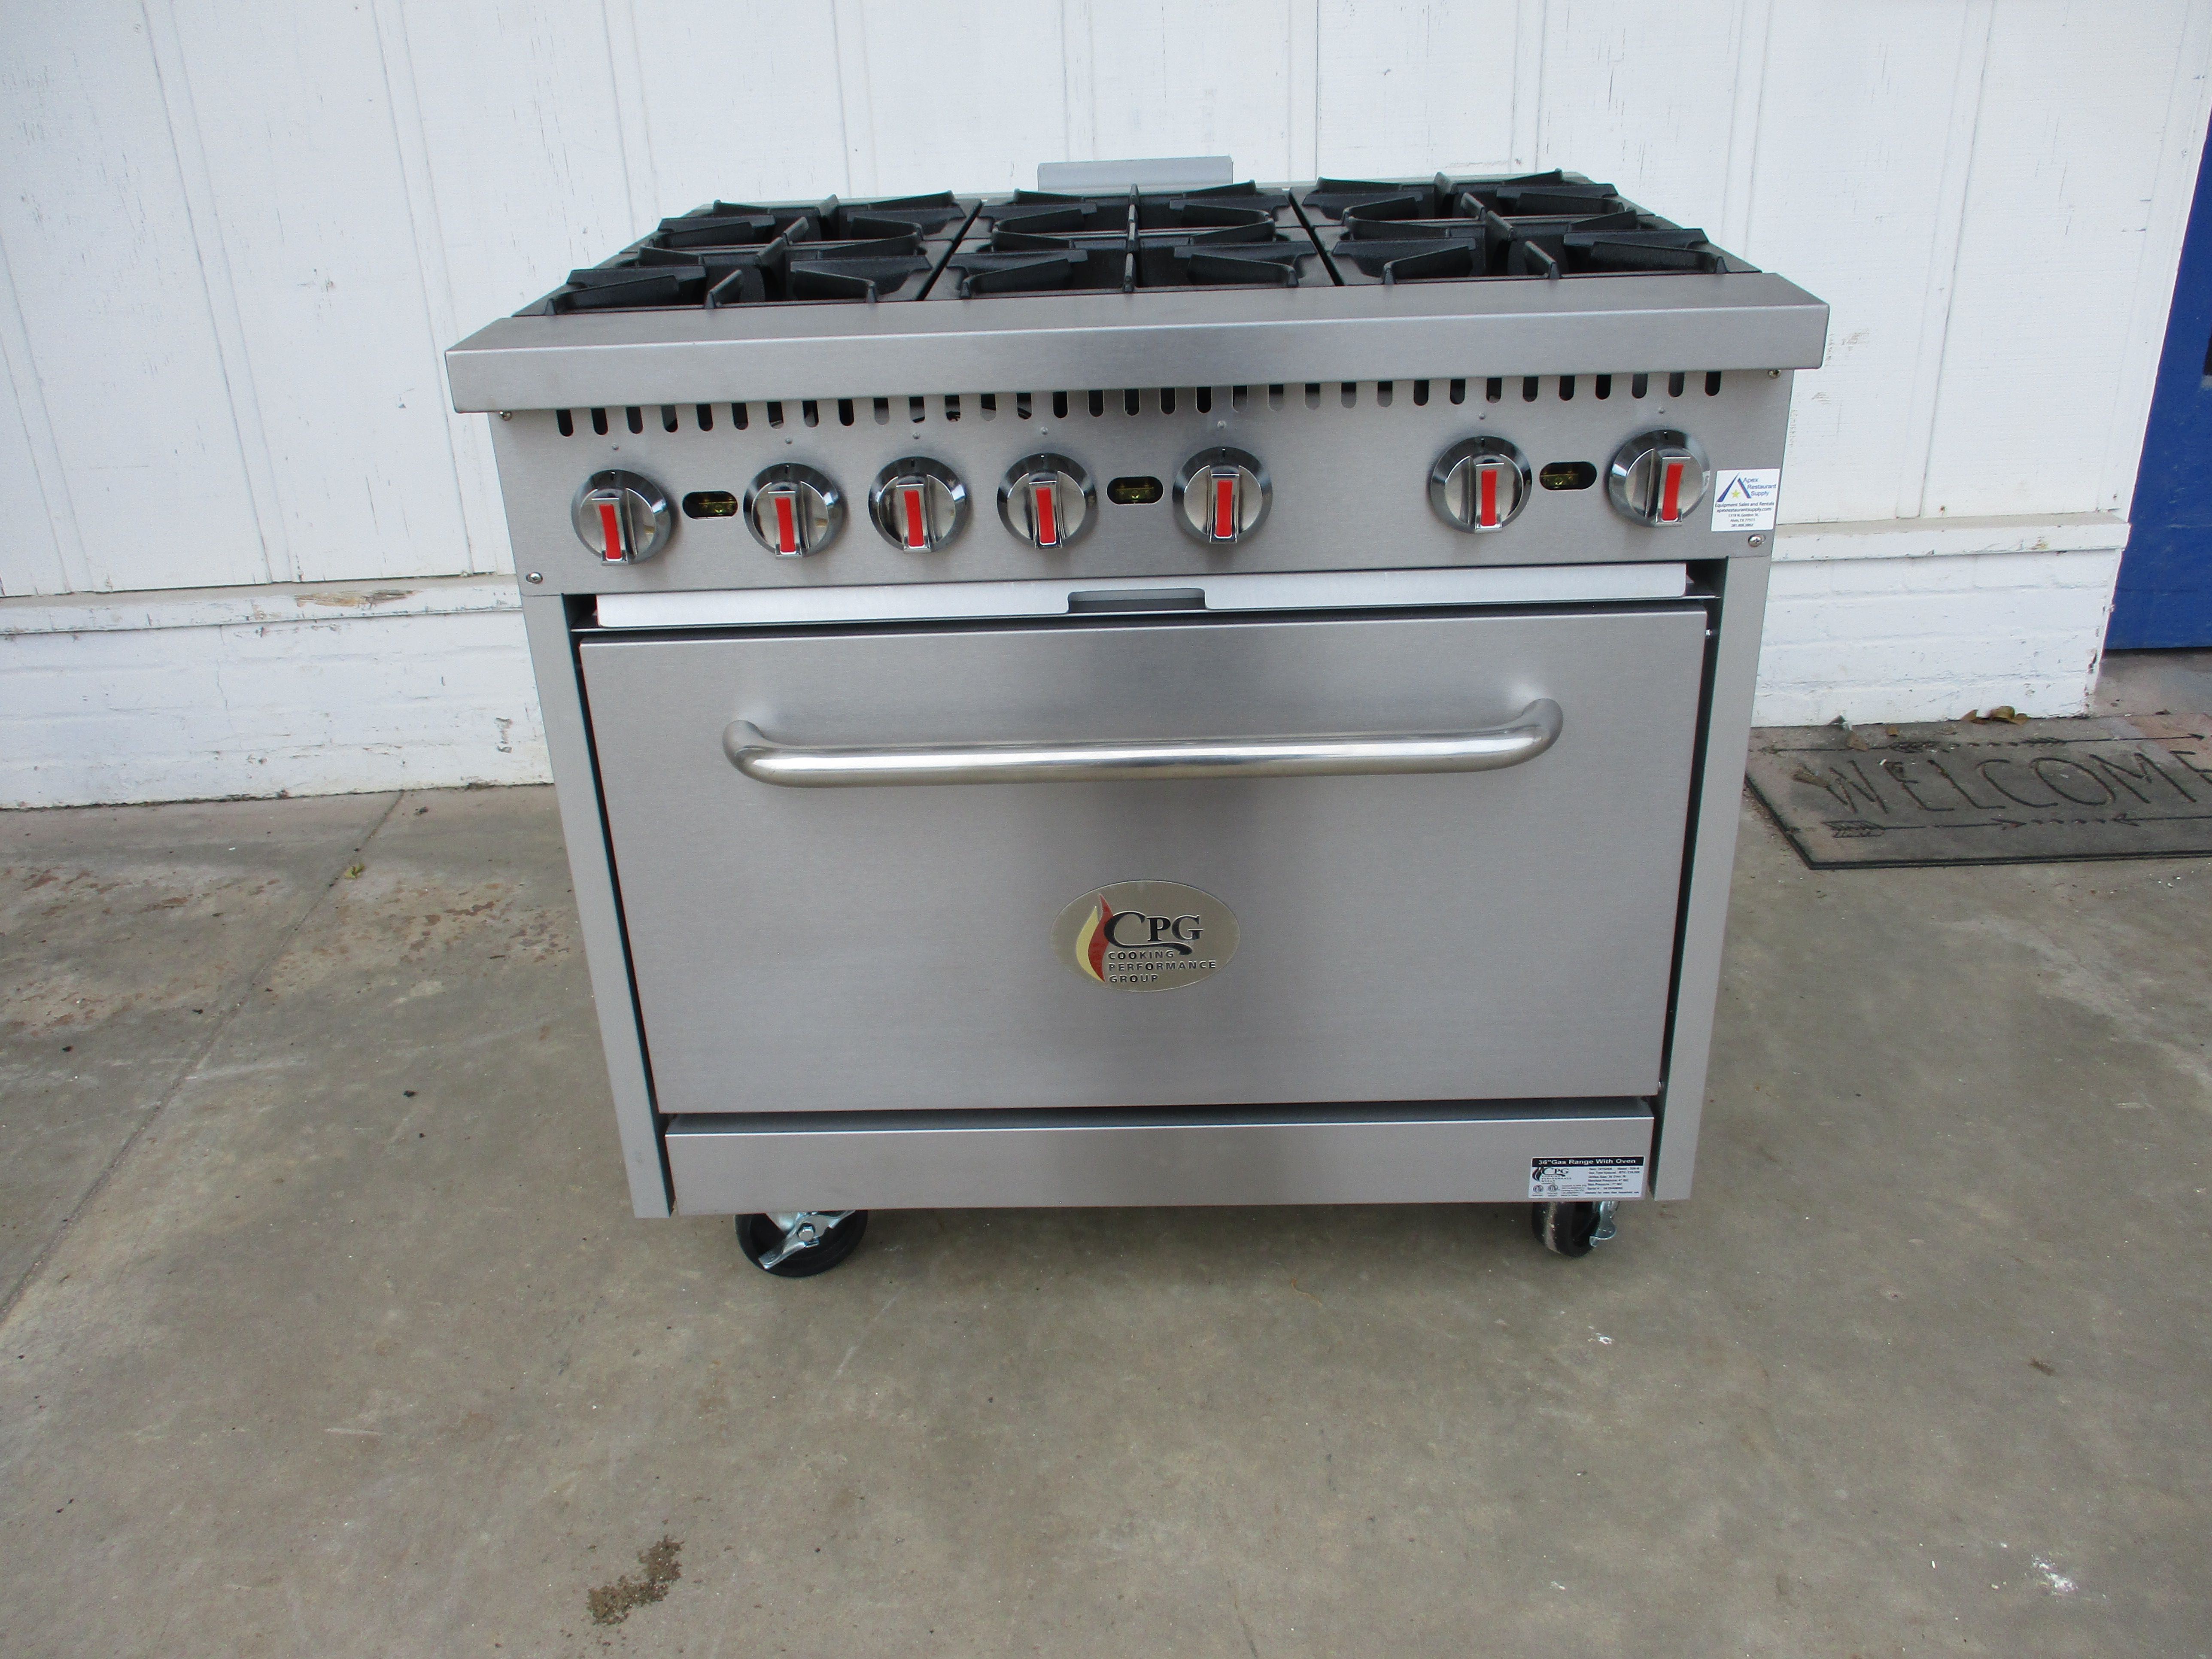 Cooking Performance Group 36 Gas Range with Oven